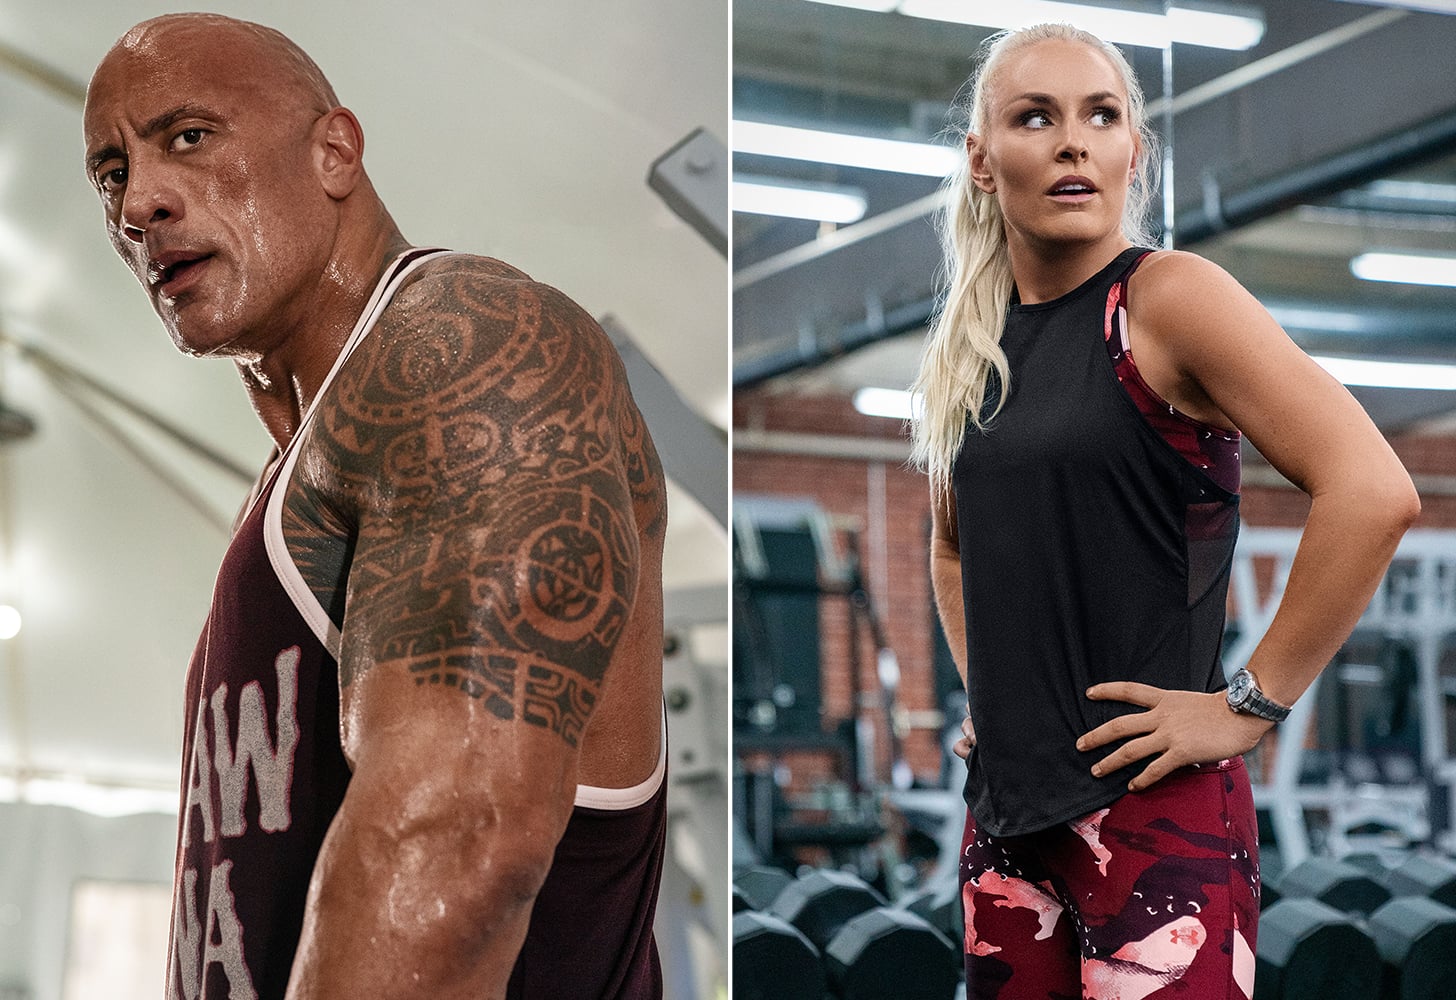 Details On The Rock's New 'Project Rock' With Under Armour